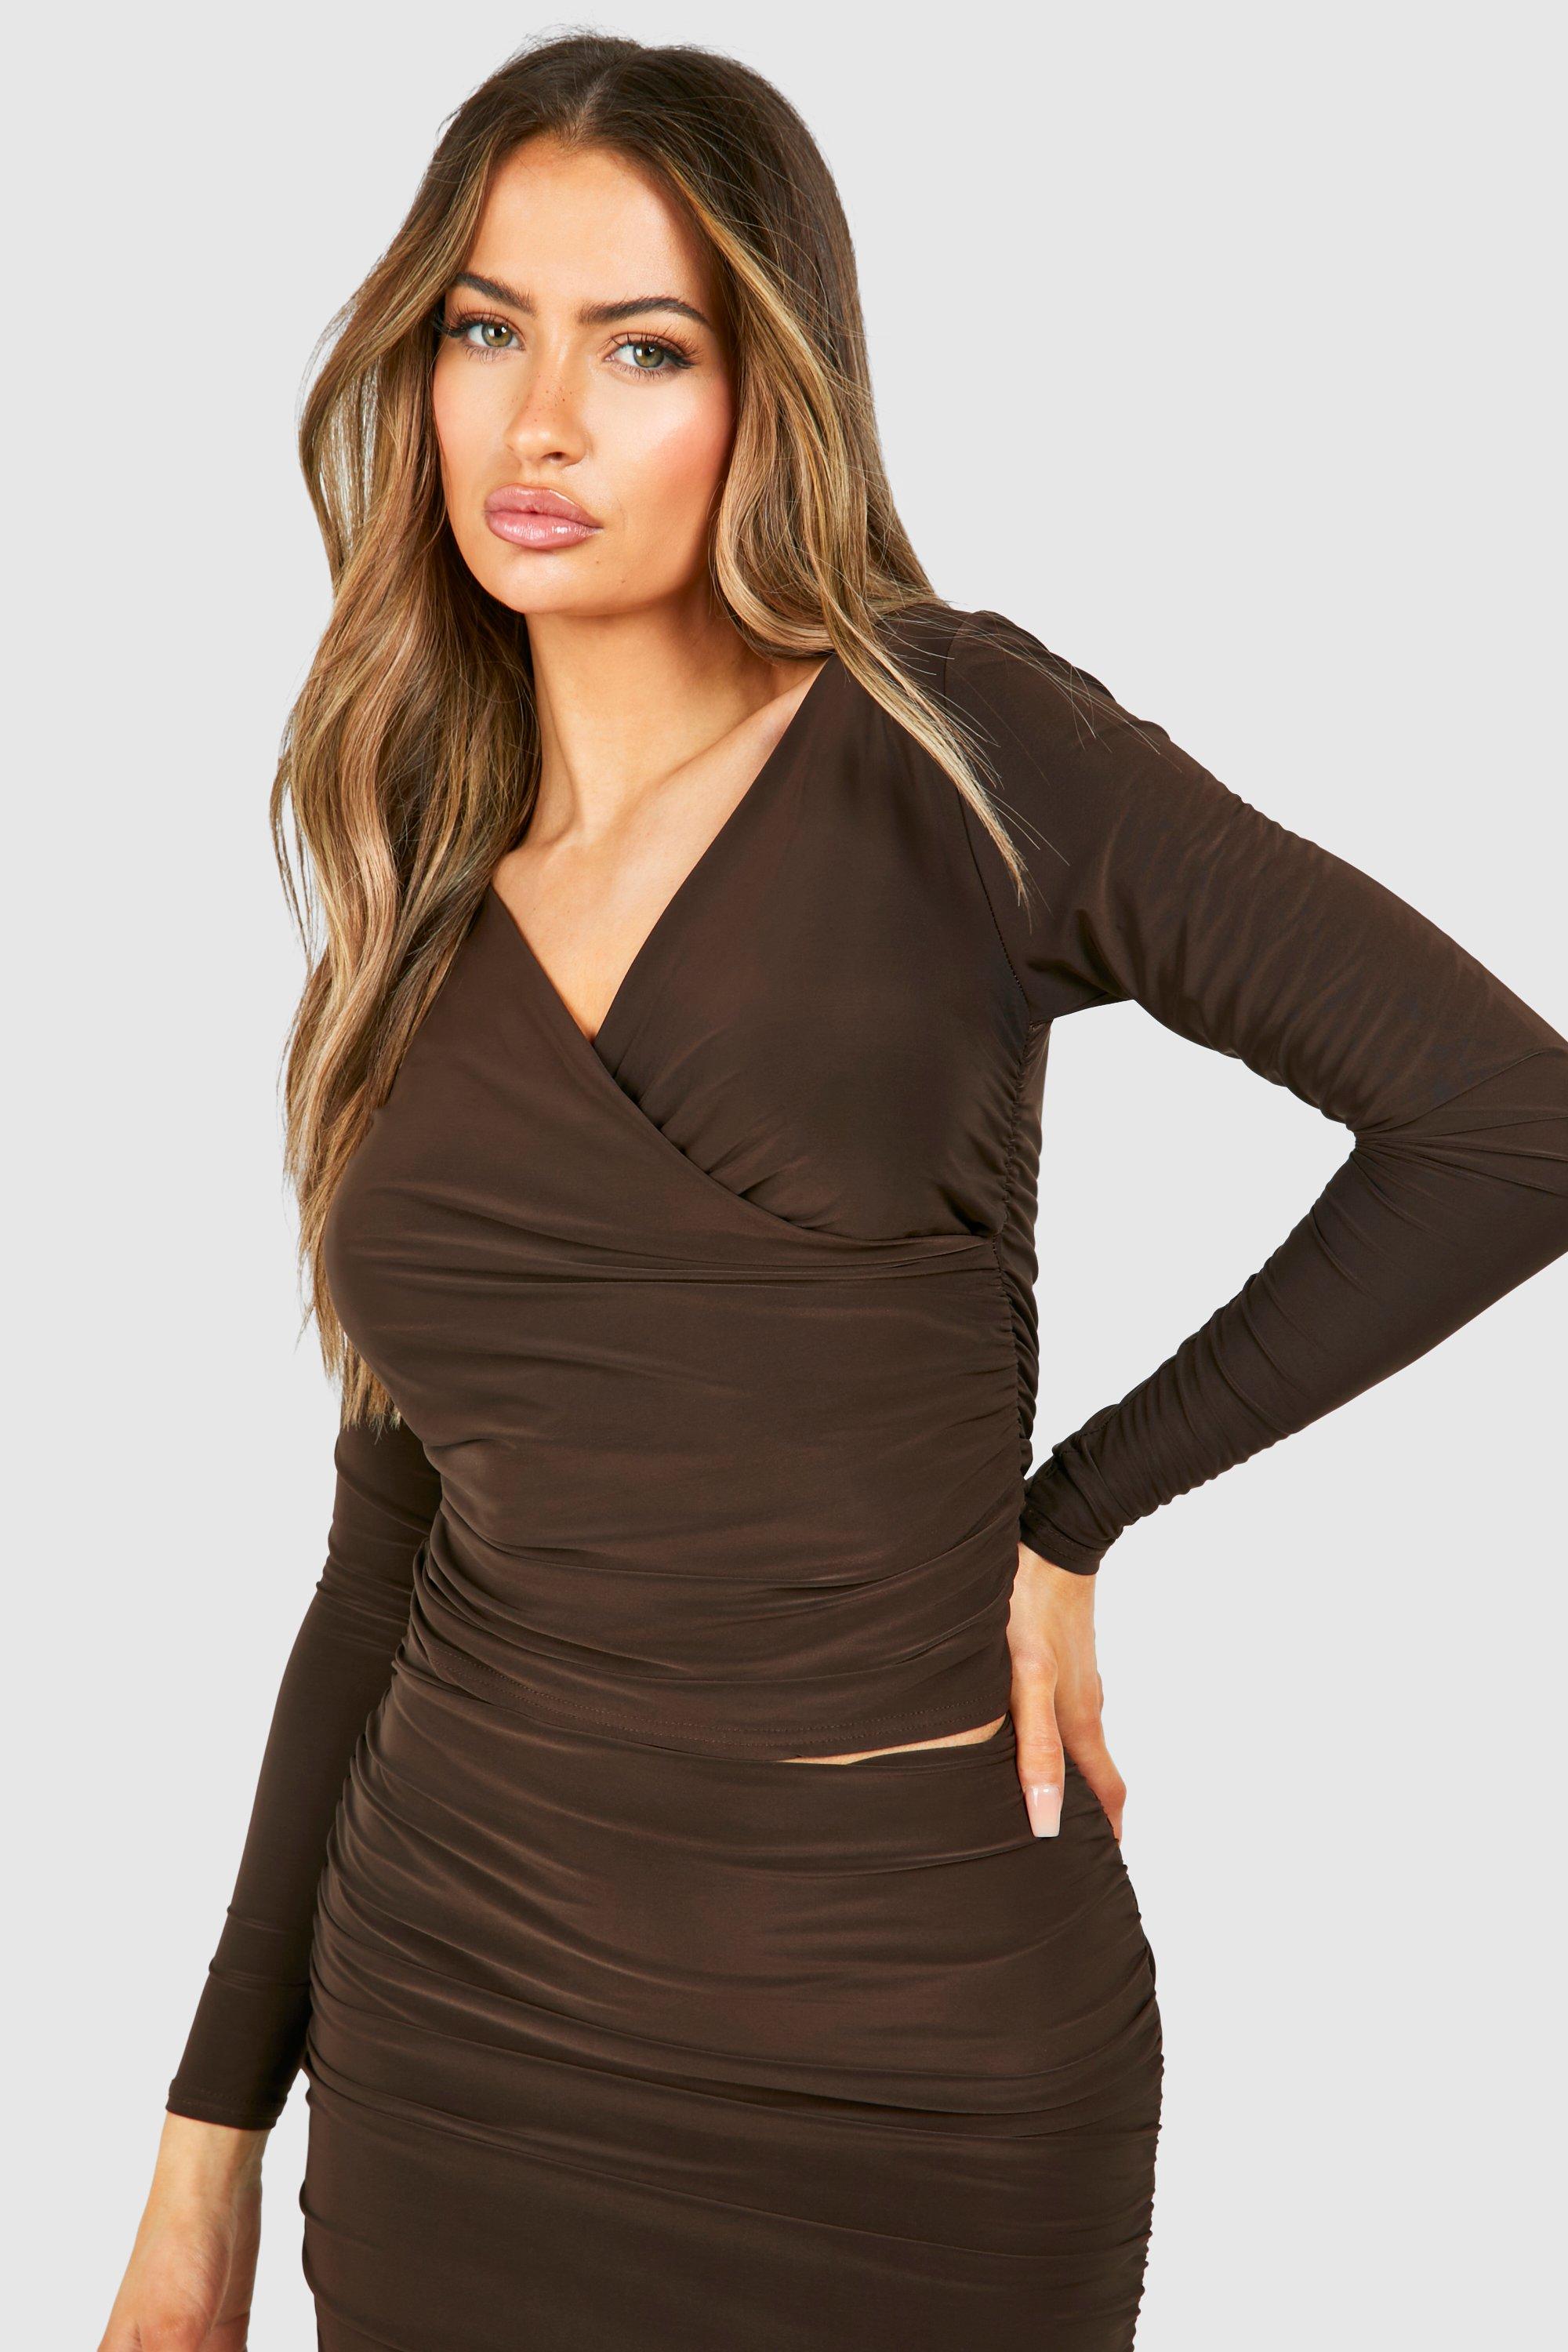 Image of V Neck Ruched Slinky Long Sleeve Top, Brown